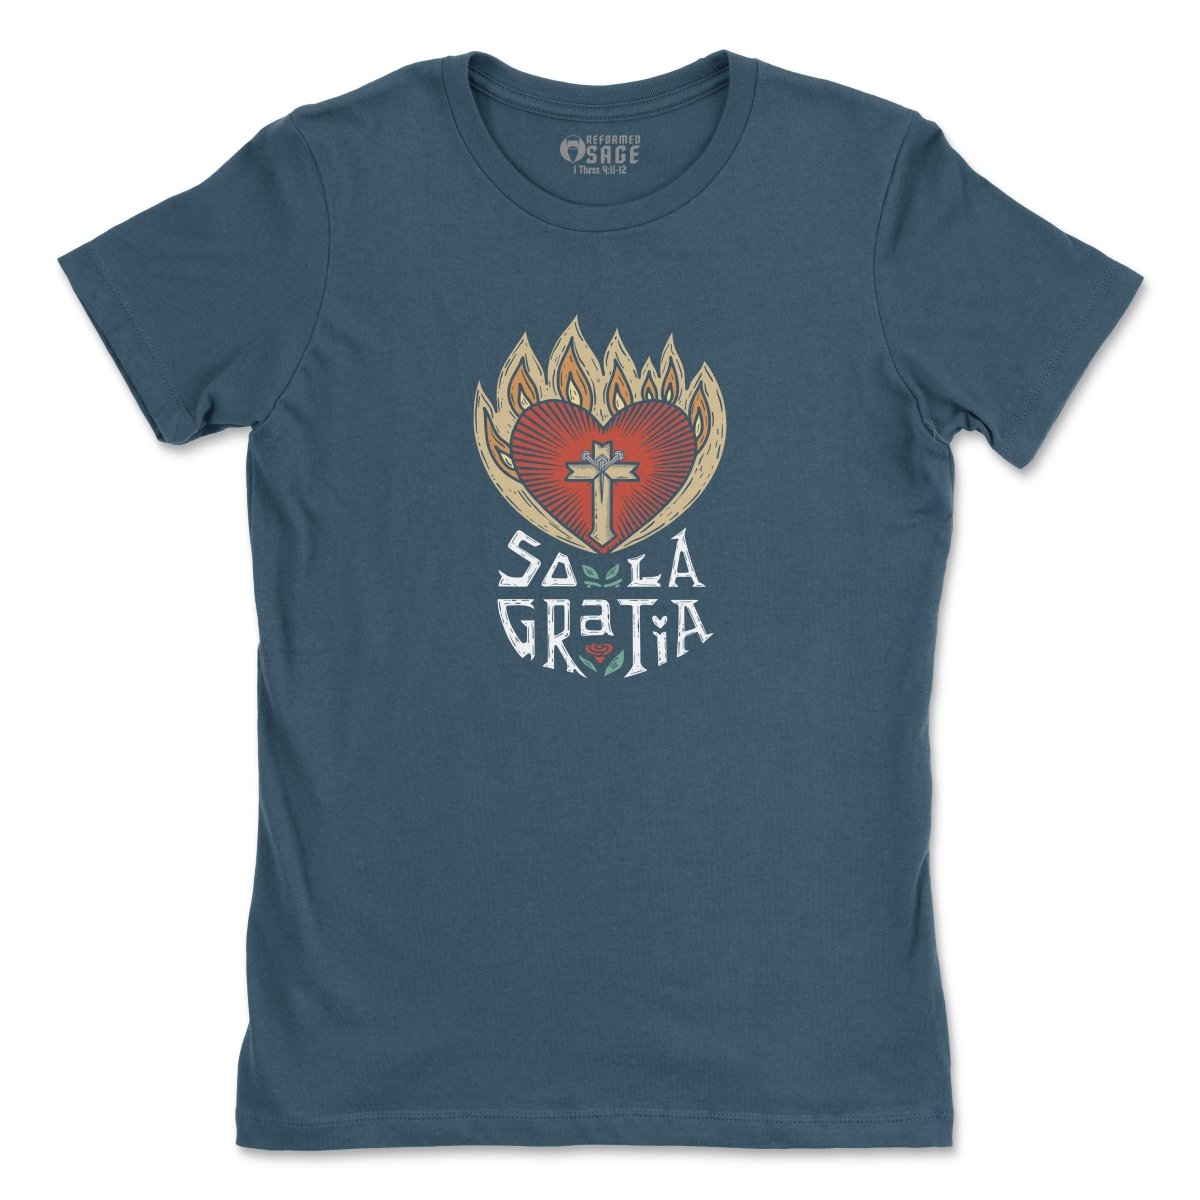 - Sola Gratia - Womens Tee - The Reformed Sage - #reformed# - #reformed_gifts# - #christian_gifts#